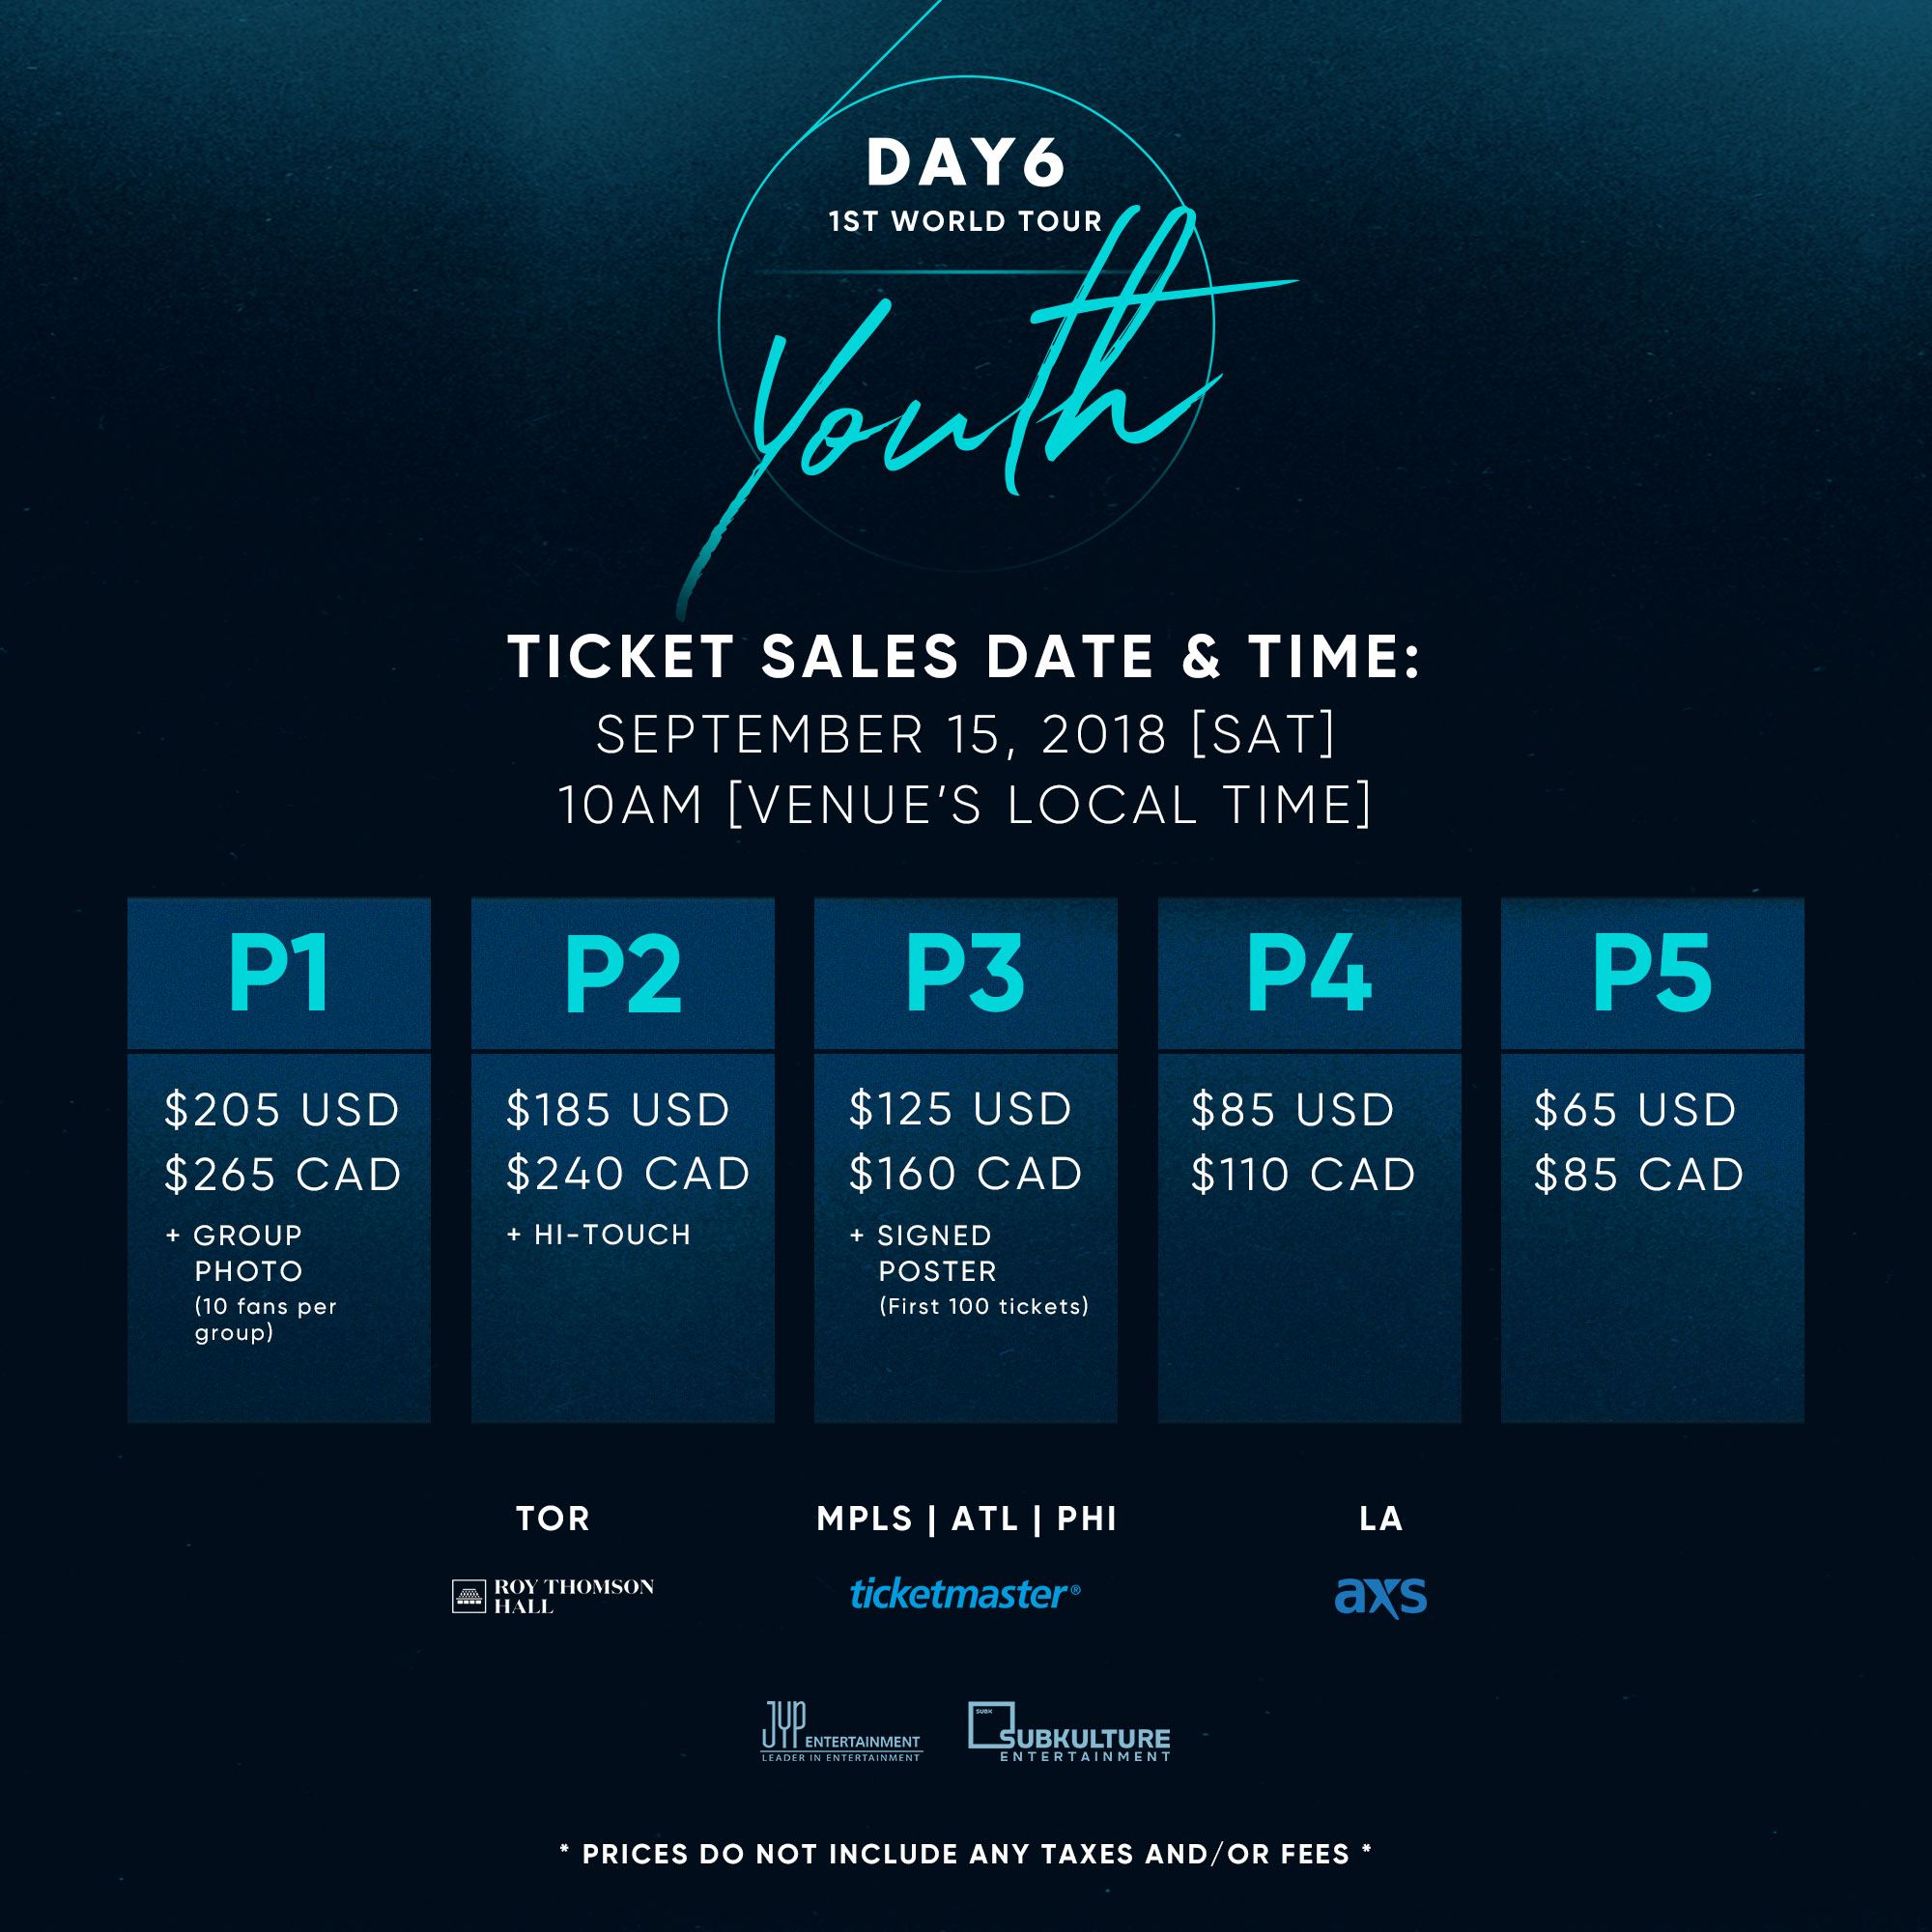 DAY6 1st World Tour ‘YOUTH’ in North America Ticket Sales Date/Time